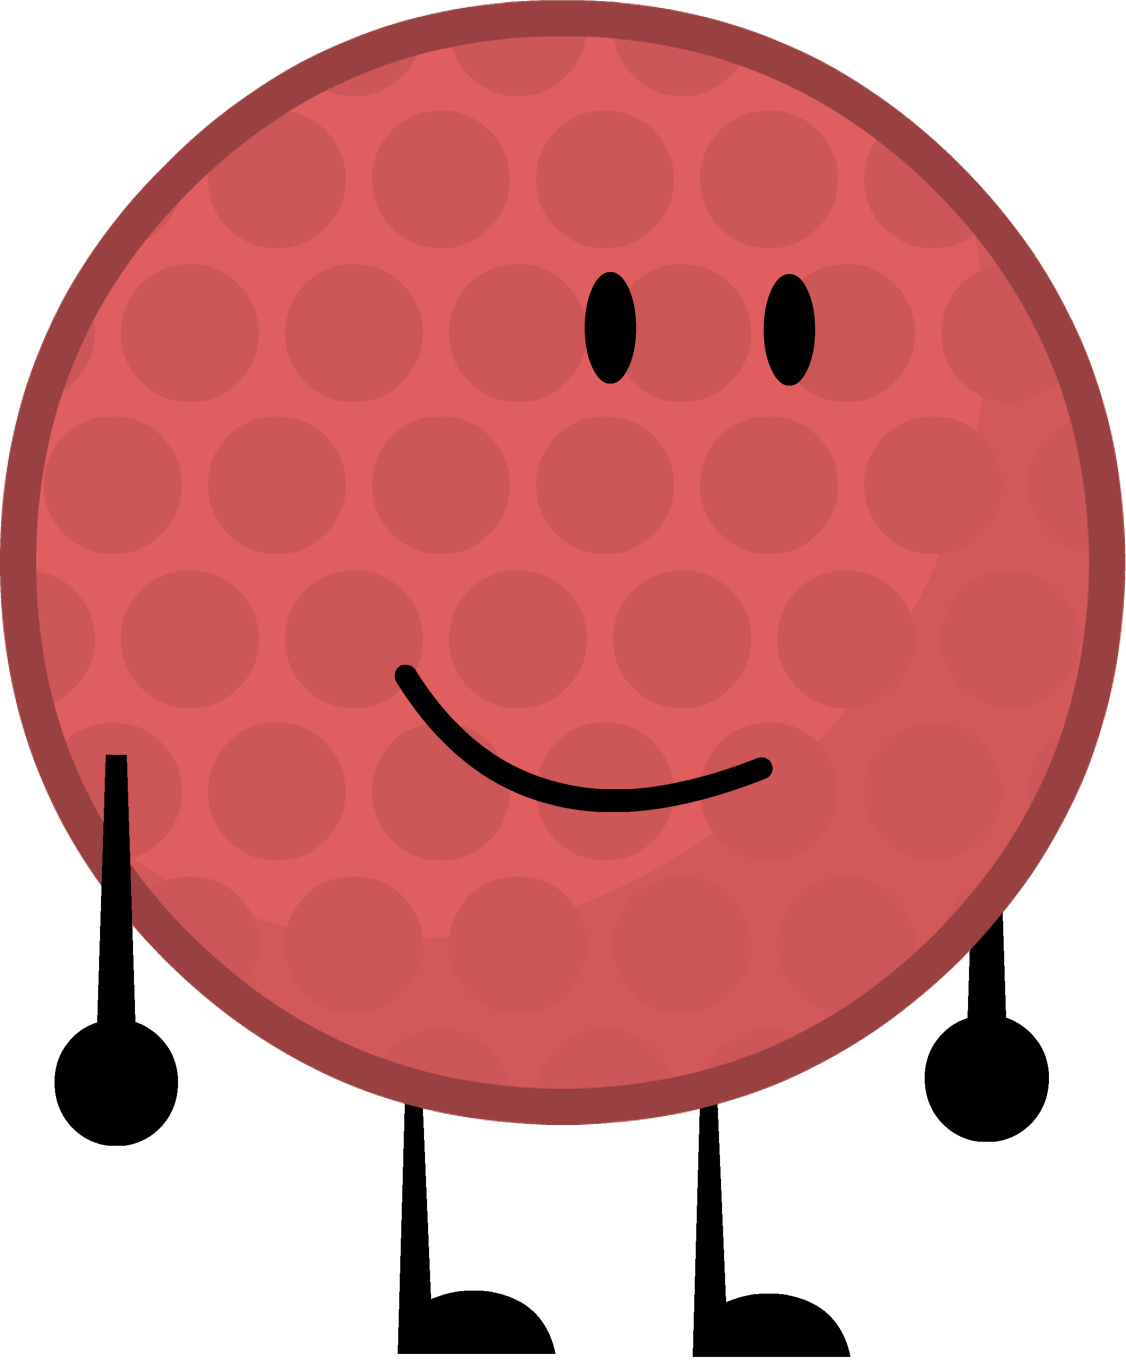 Red Golfball By Brownpen0 - Bfdi Red Golf Ball (1126x1363)